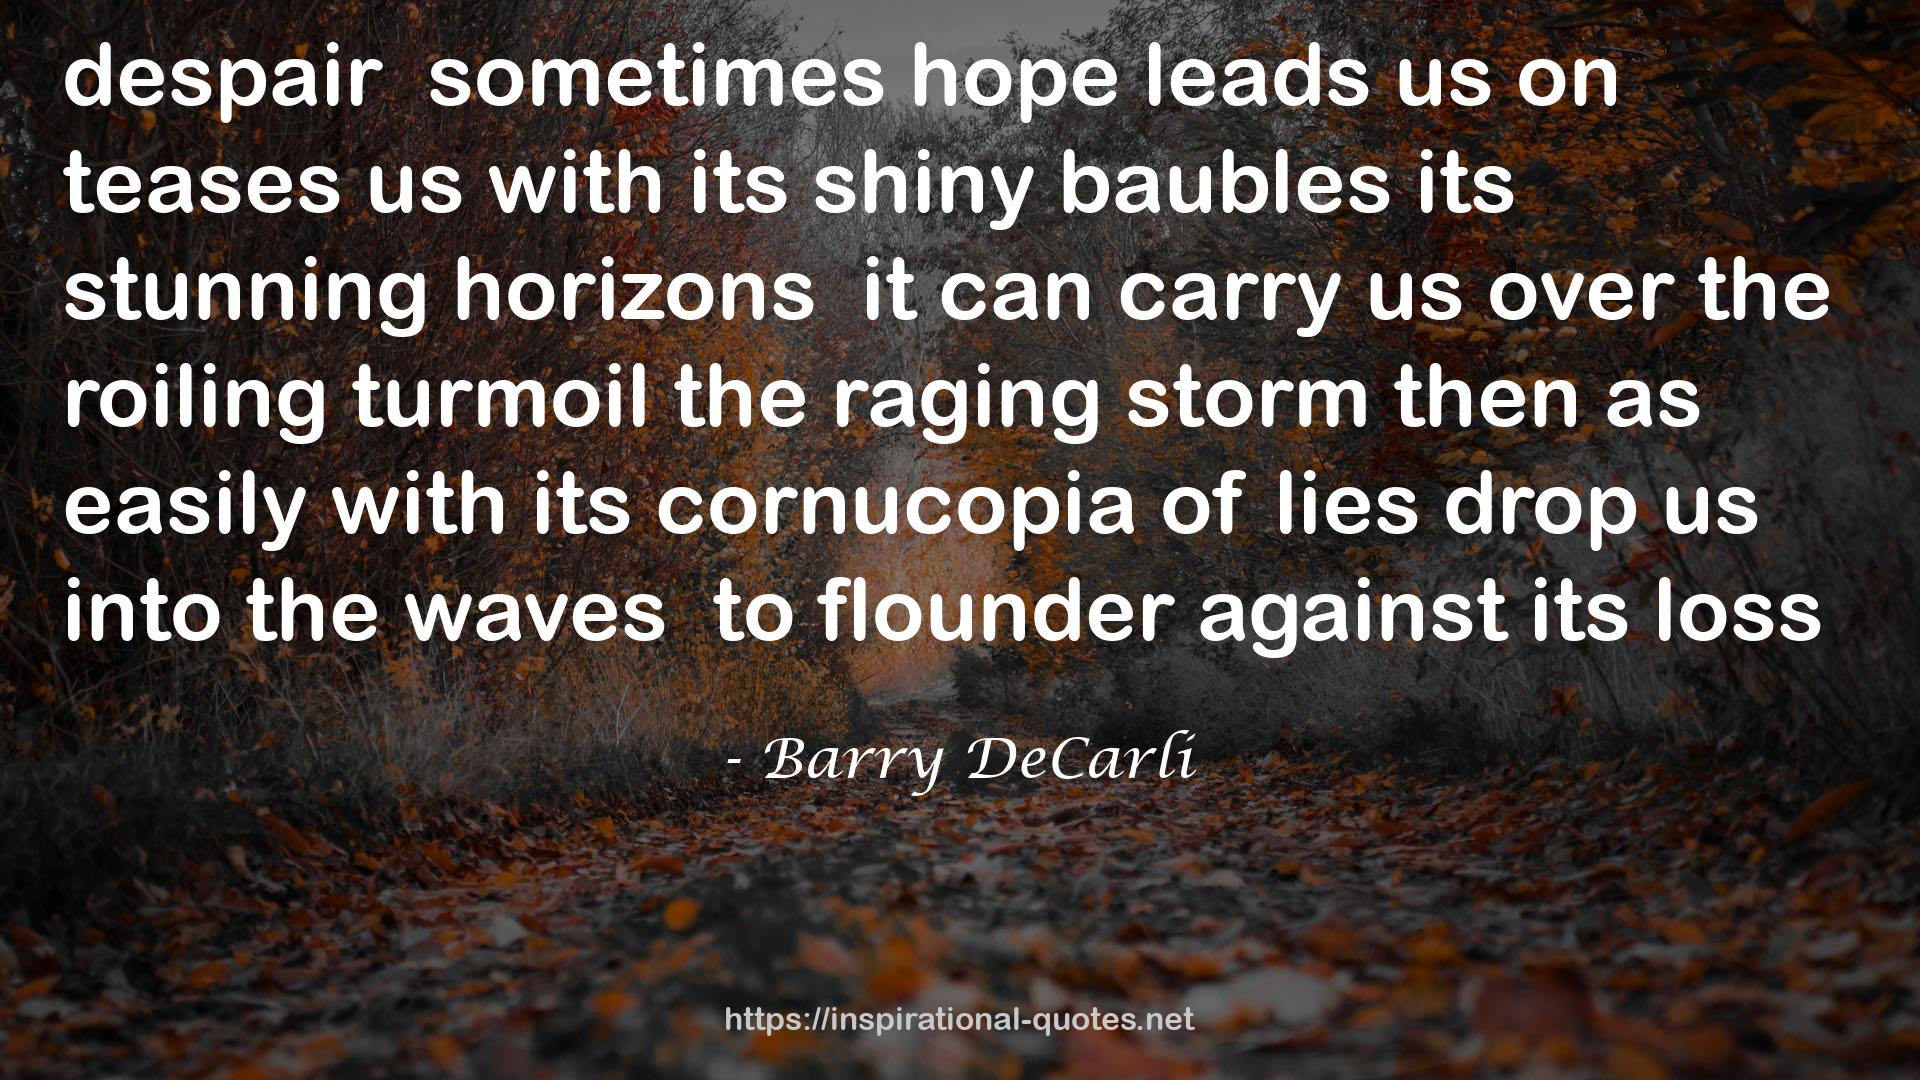 Barry DeCarli QUOTES